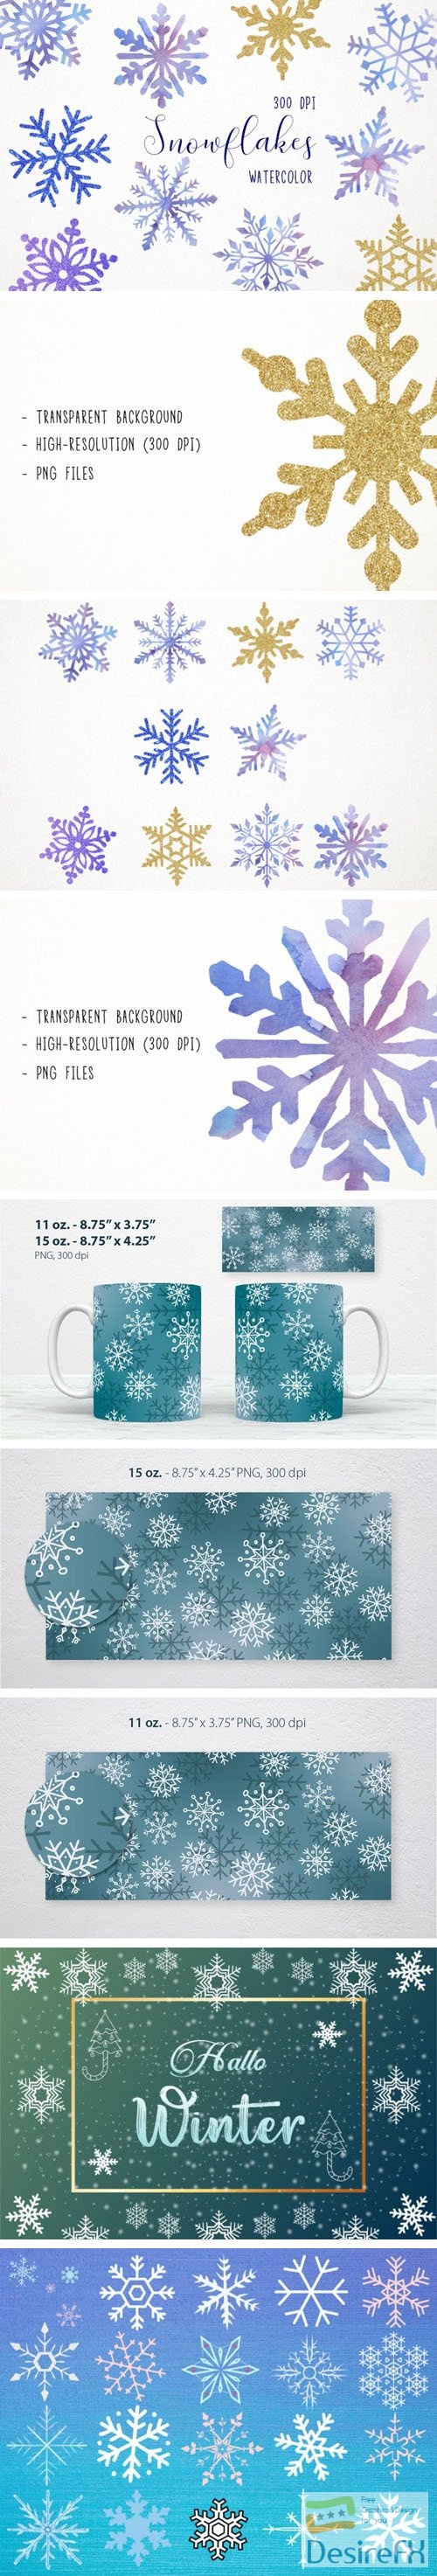 Snowflakes - Clipart Collection